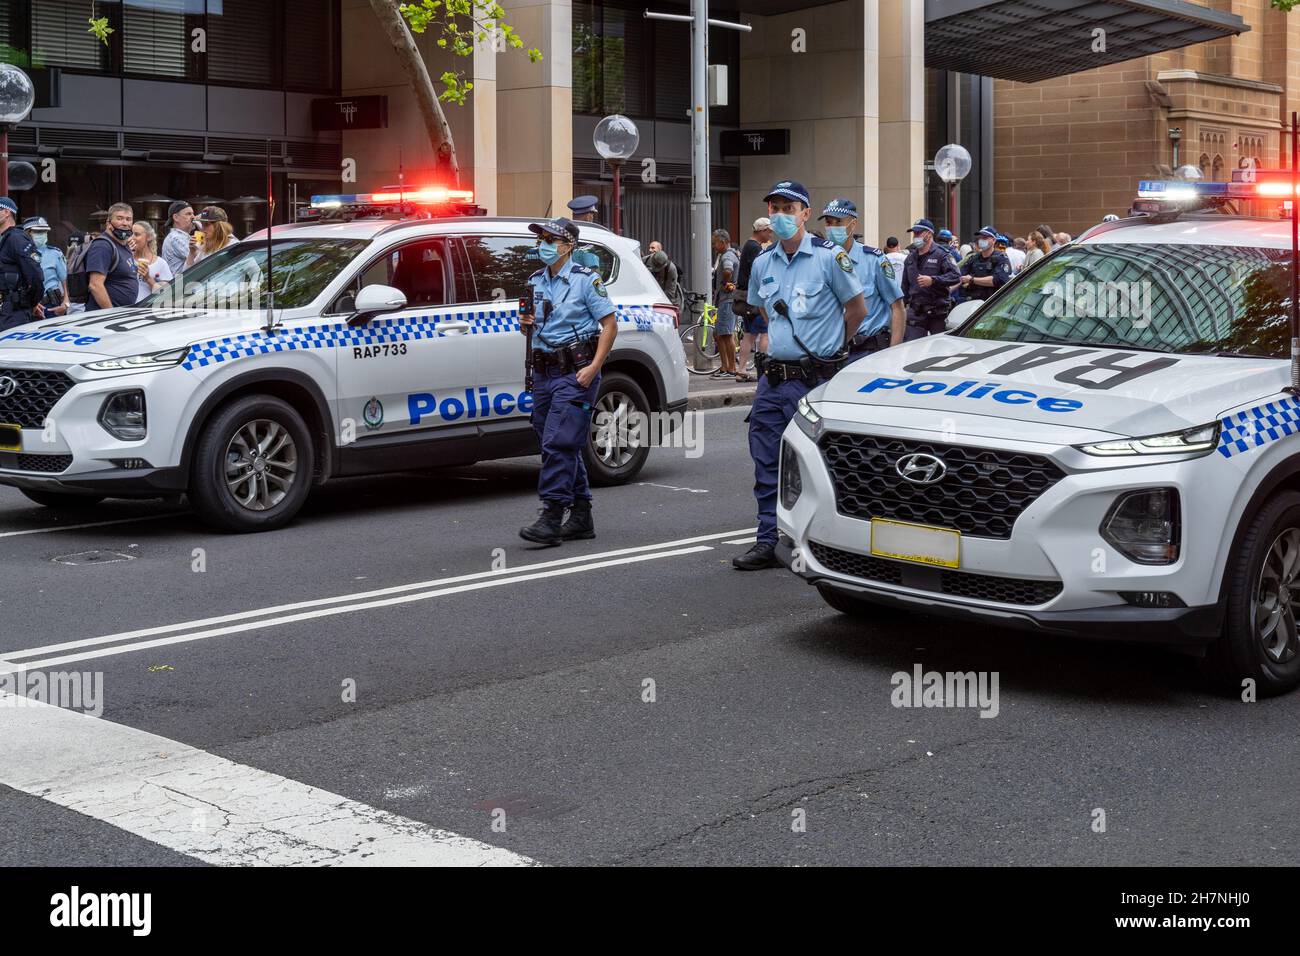 Police officers with police vehicles on patrol Sydney Australia during anti vaccine protest against government mandates. Stock Photo